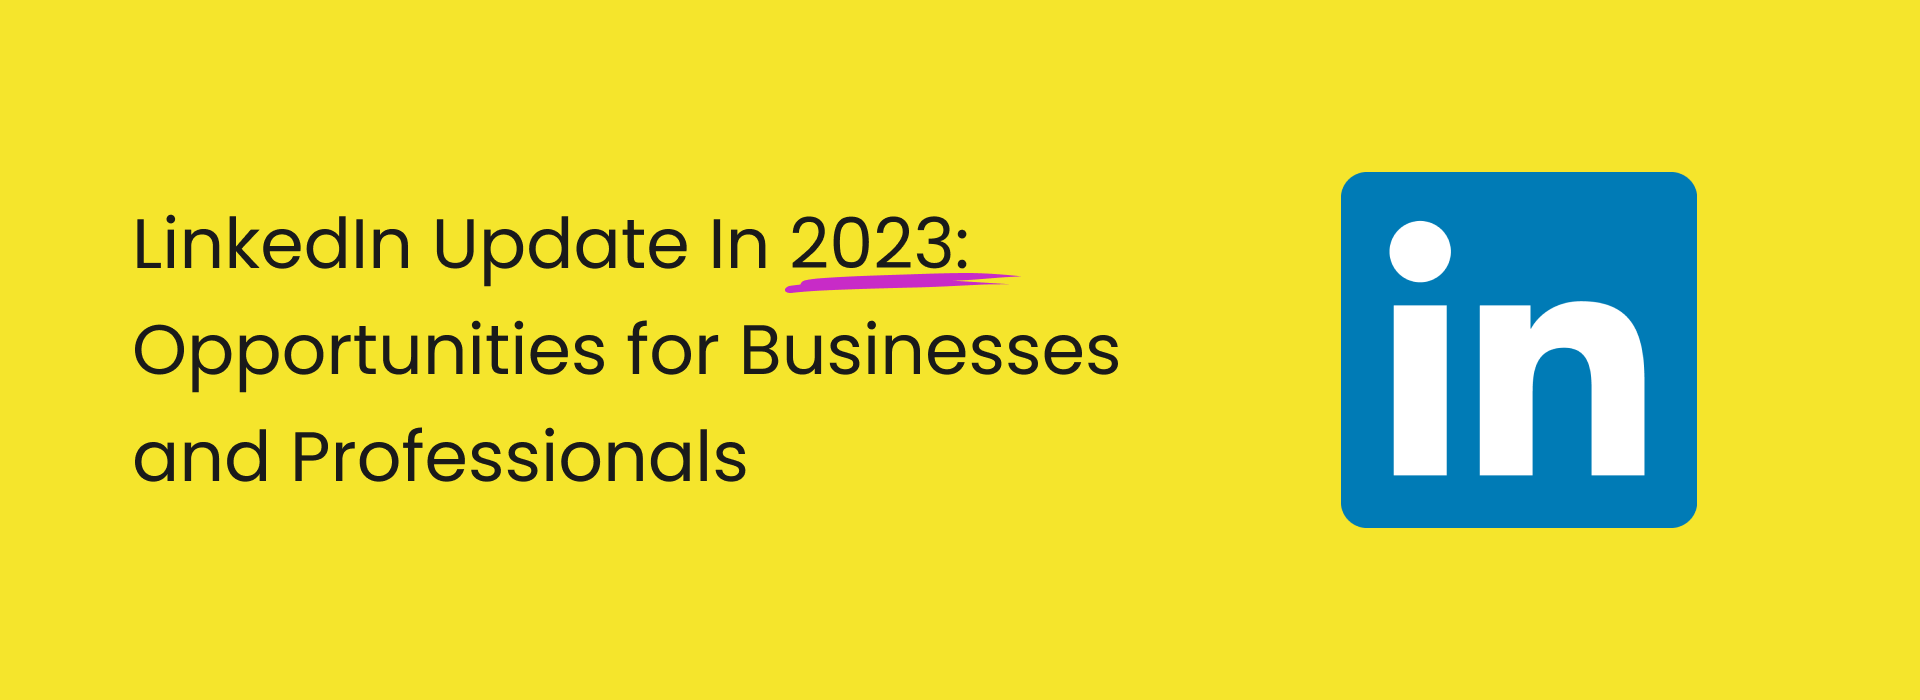 LinkedIn Update in 2023: Opportunities for Businesses and Professionals